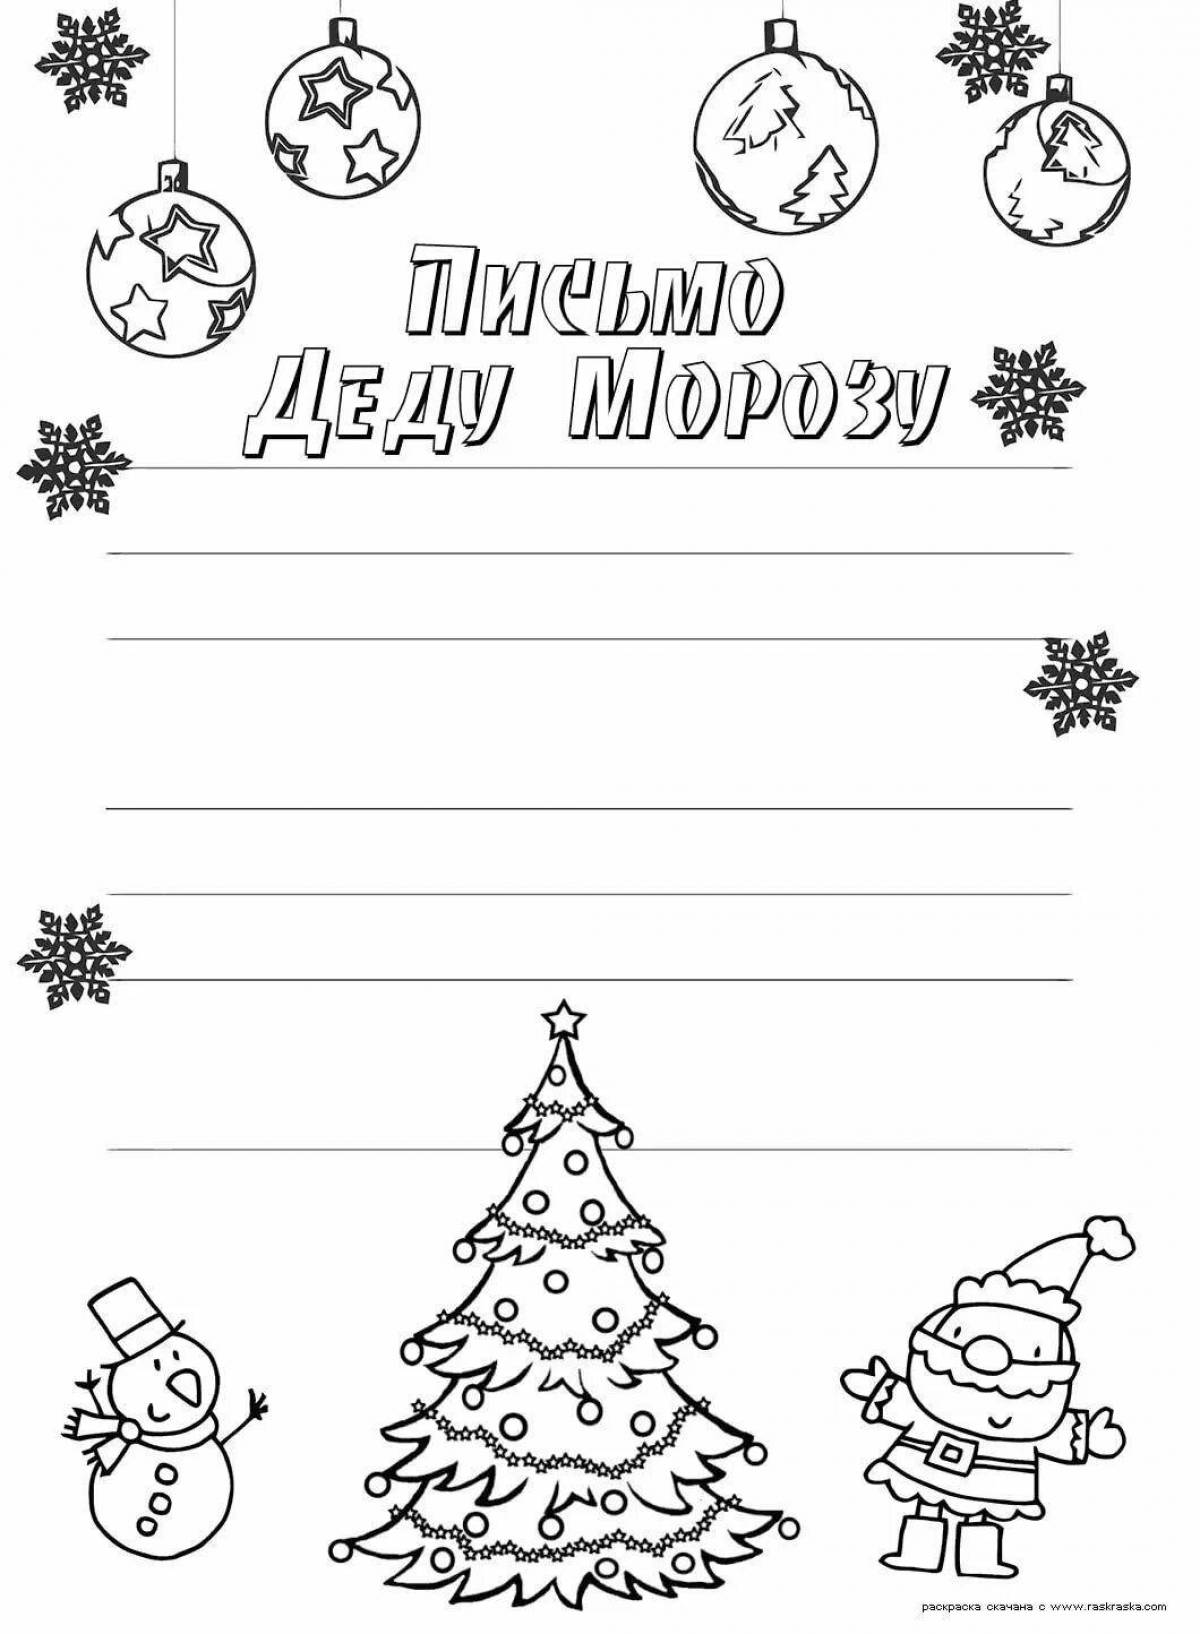 Awesome coloring letter template to Santa Claus